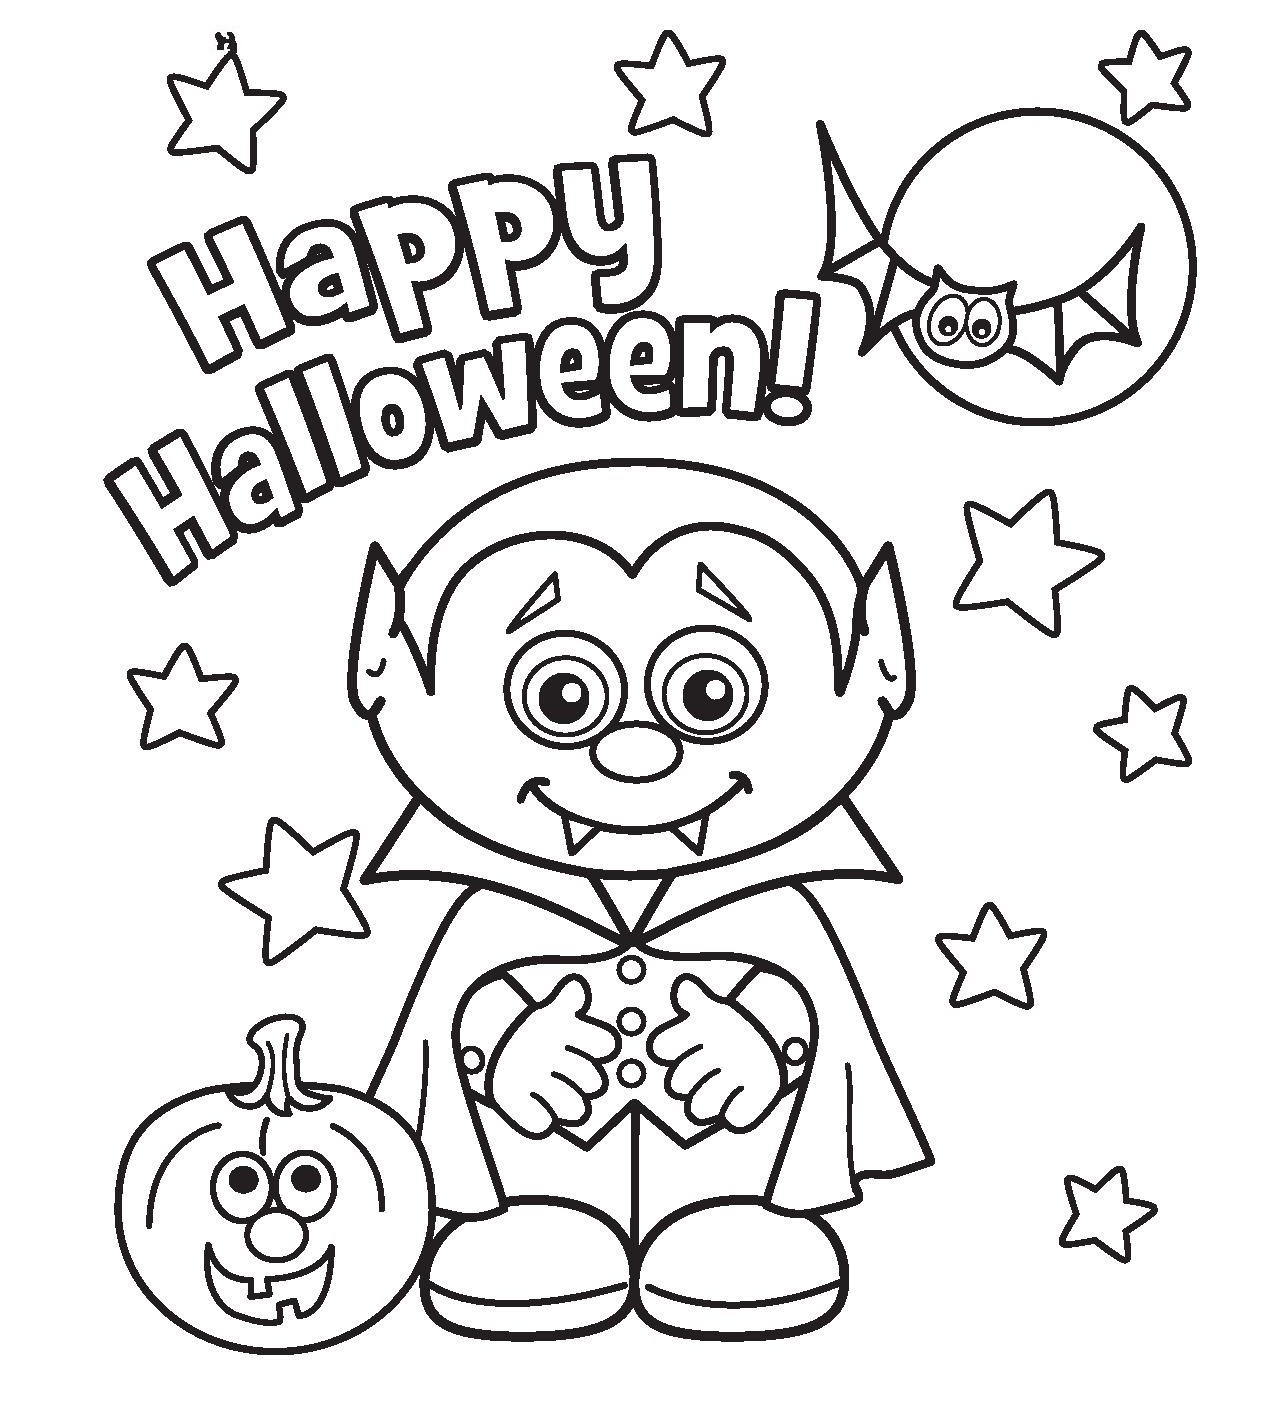 357 Simple Minion Halloween Coloring Pages 